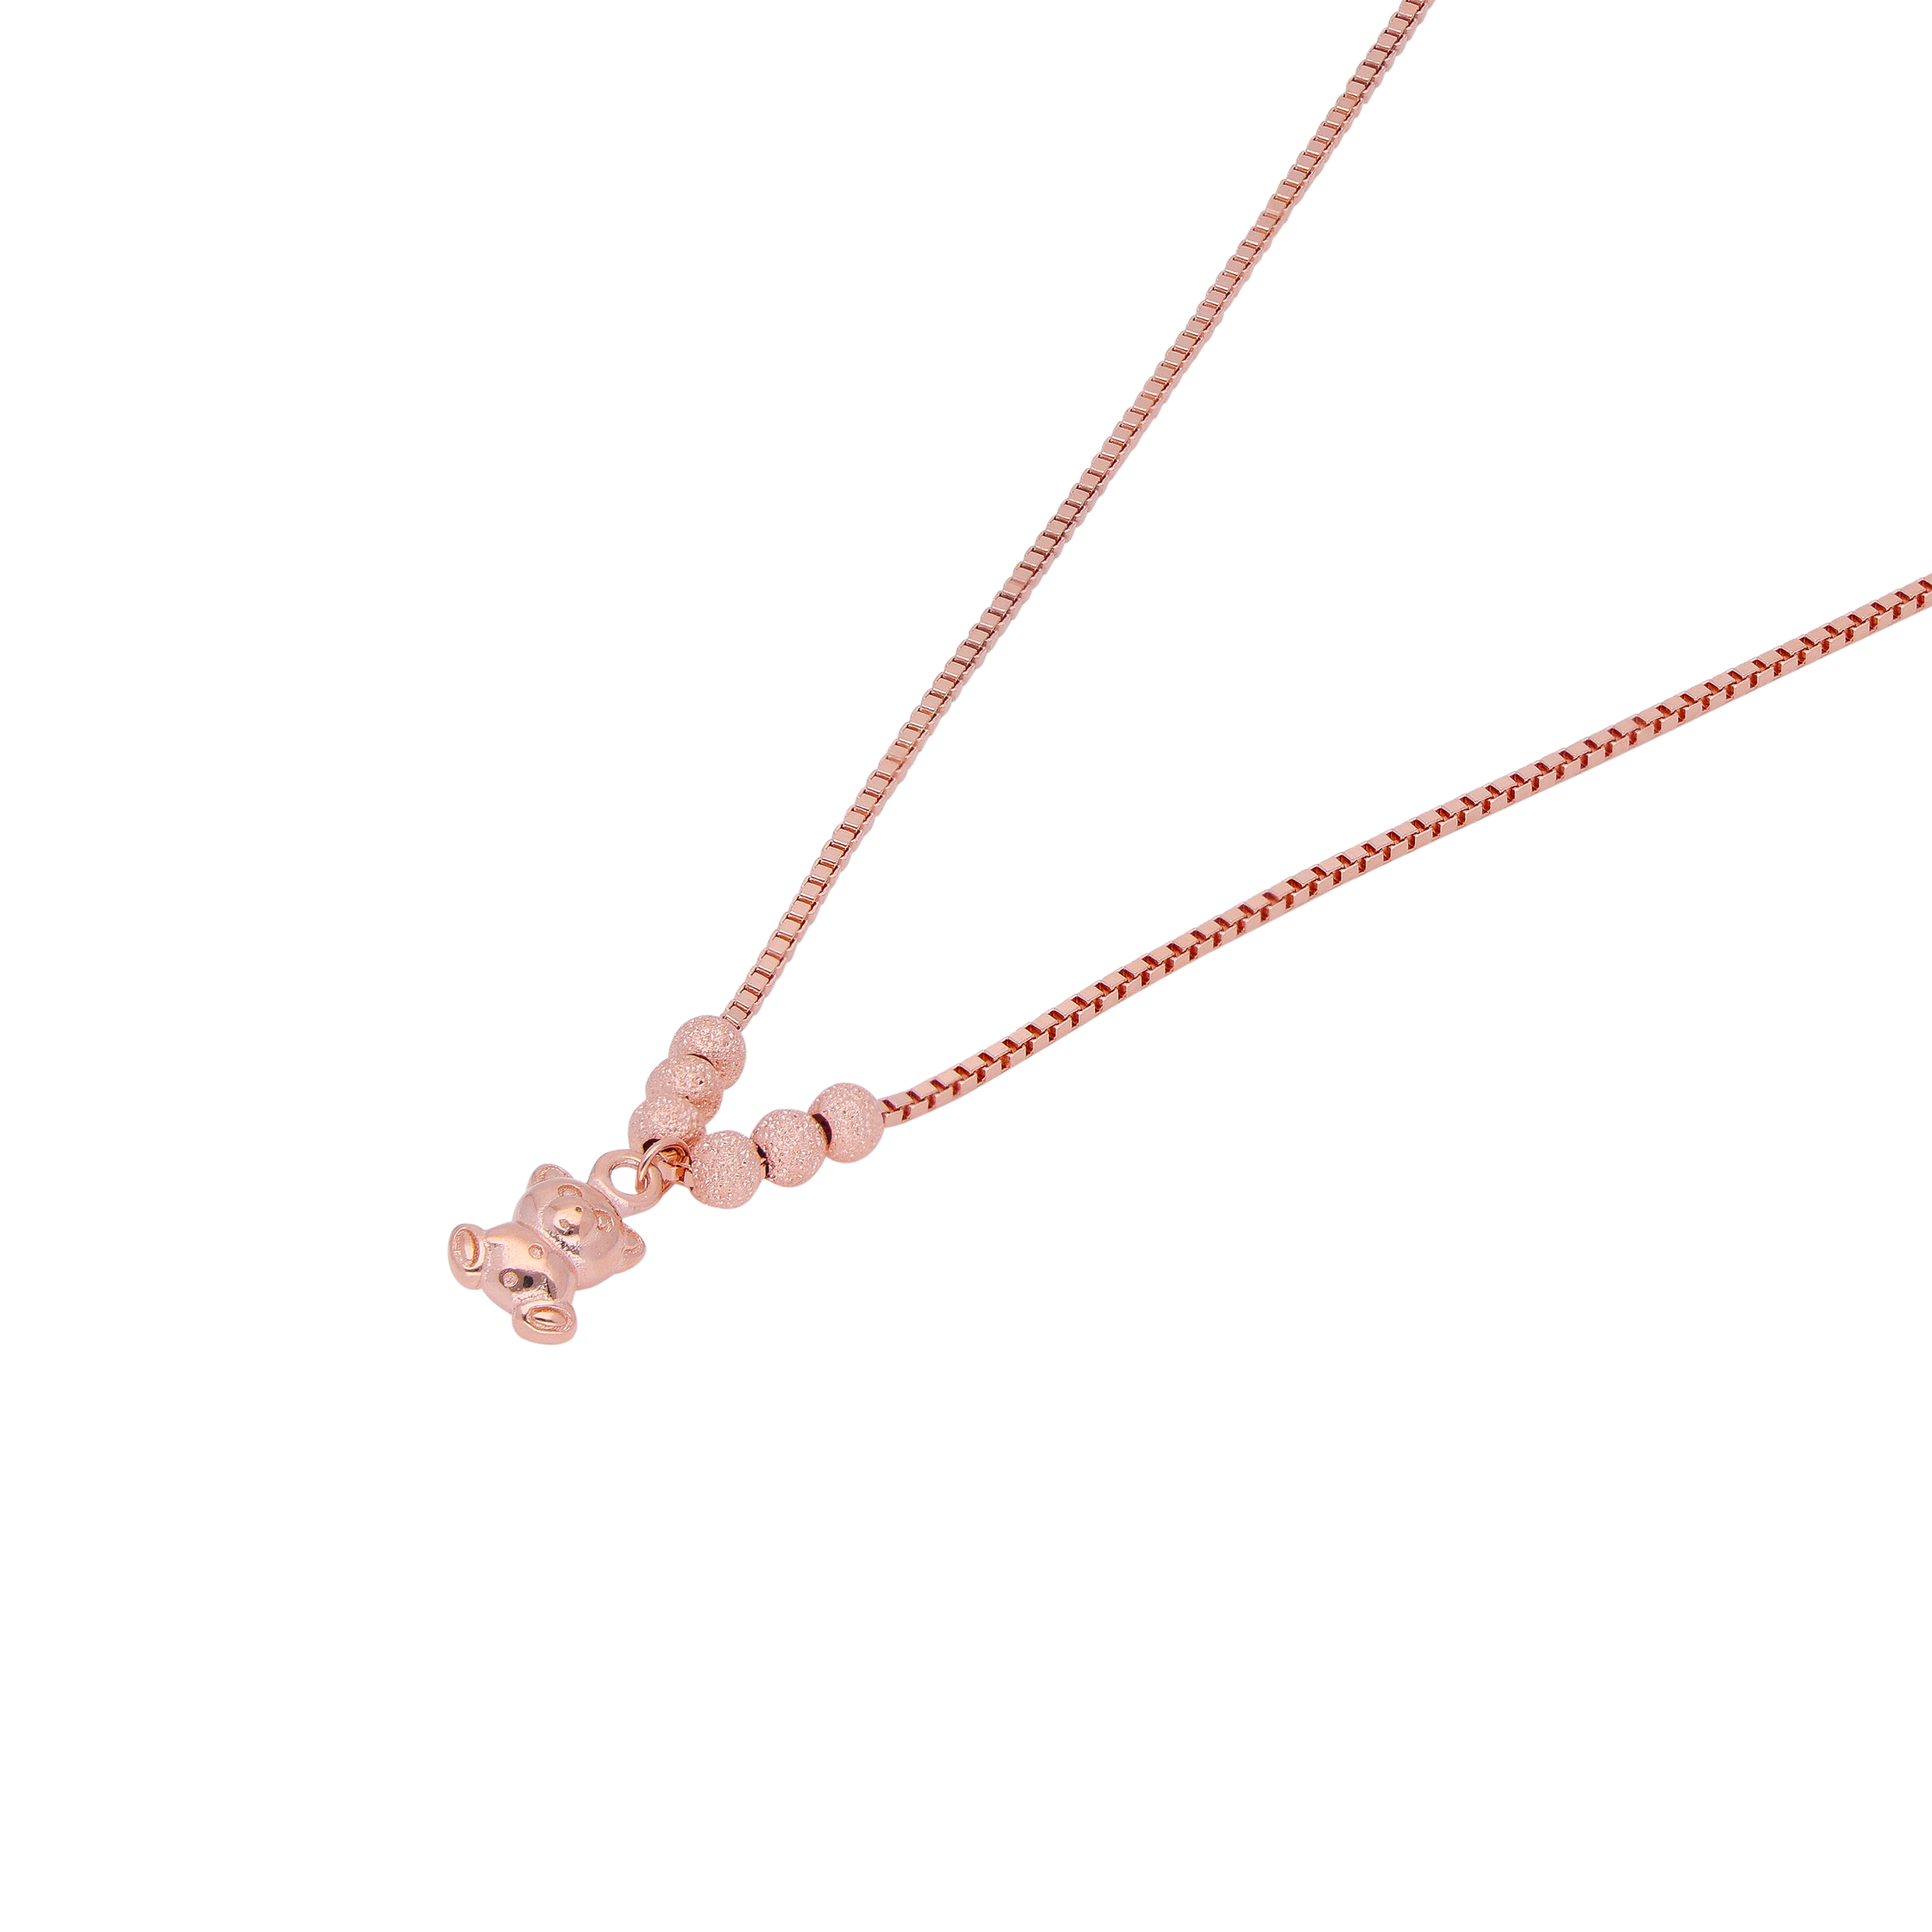 Rose Gold Teddy Bear Pendant with Sparkle Accents | SKU: 0019272214, 0019281681, 0019272351, 0019281544